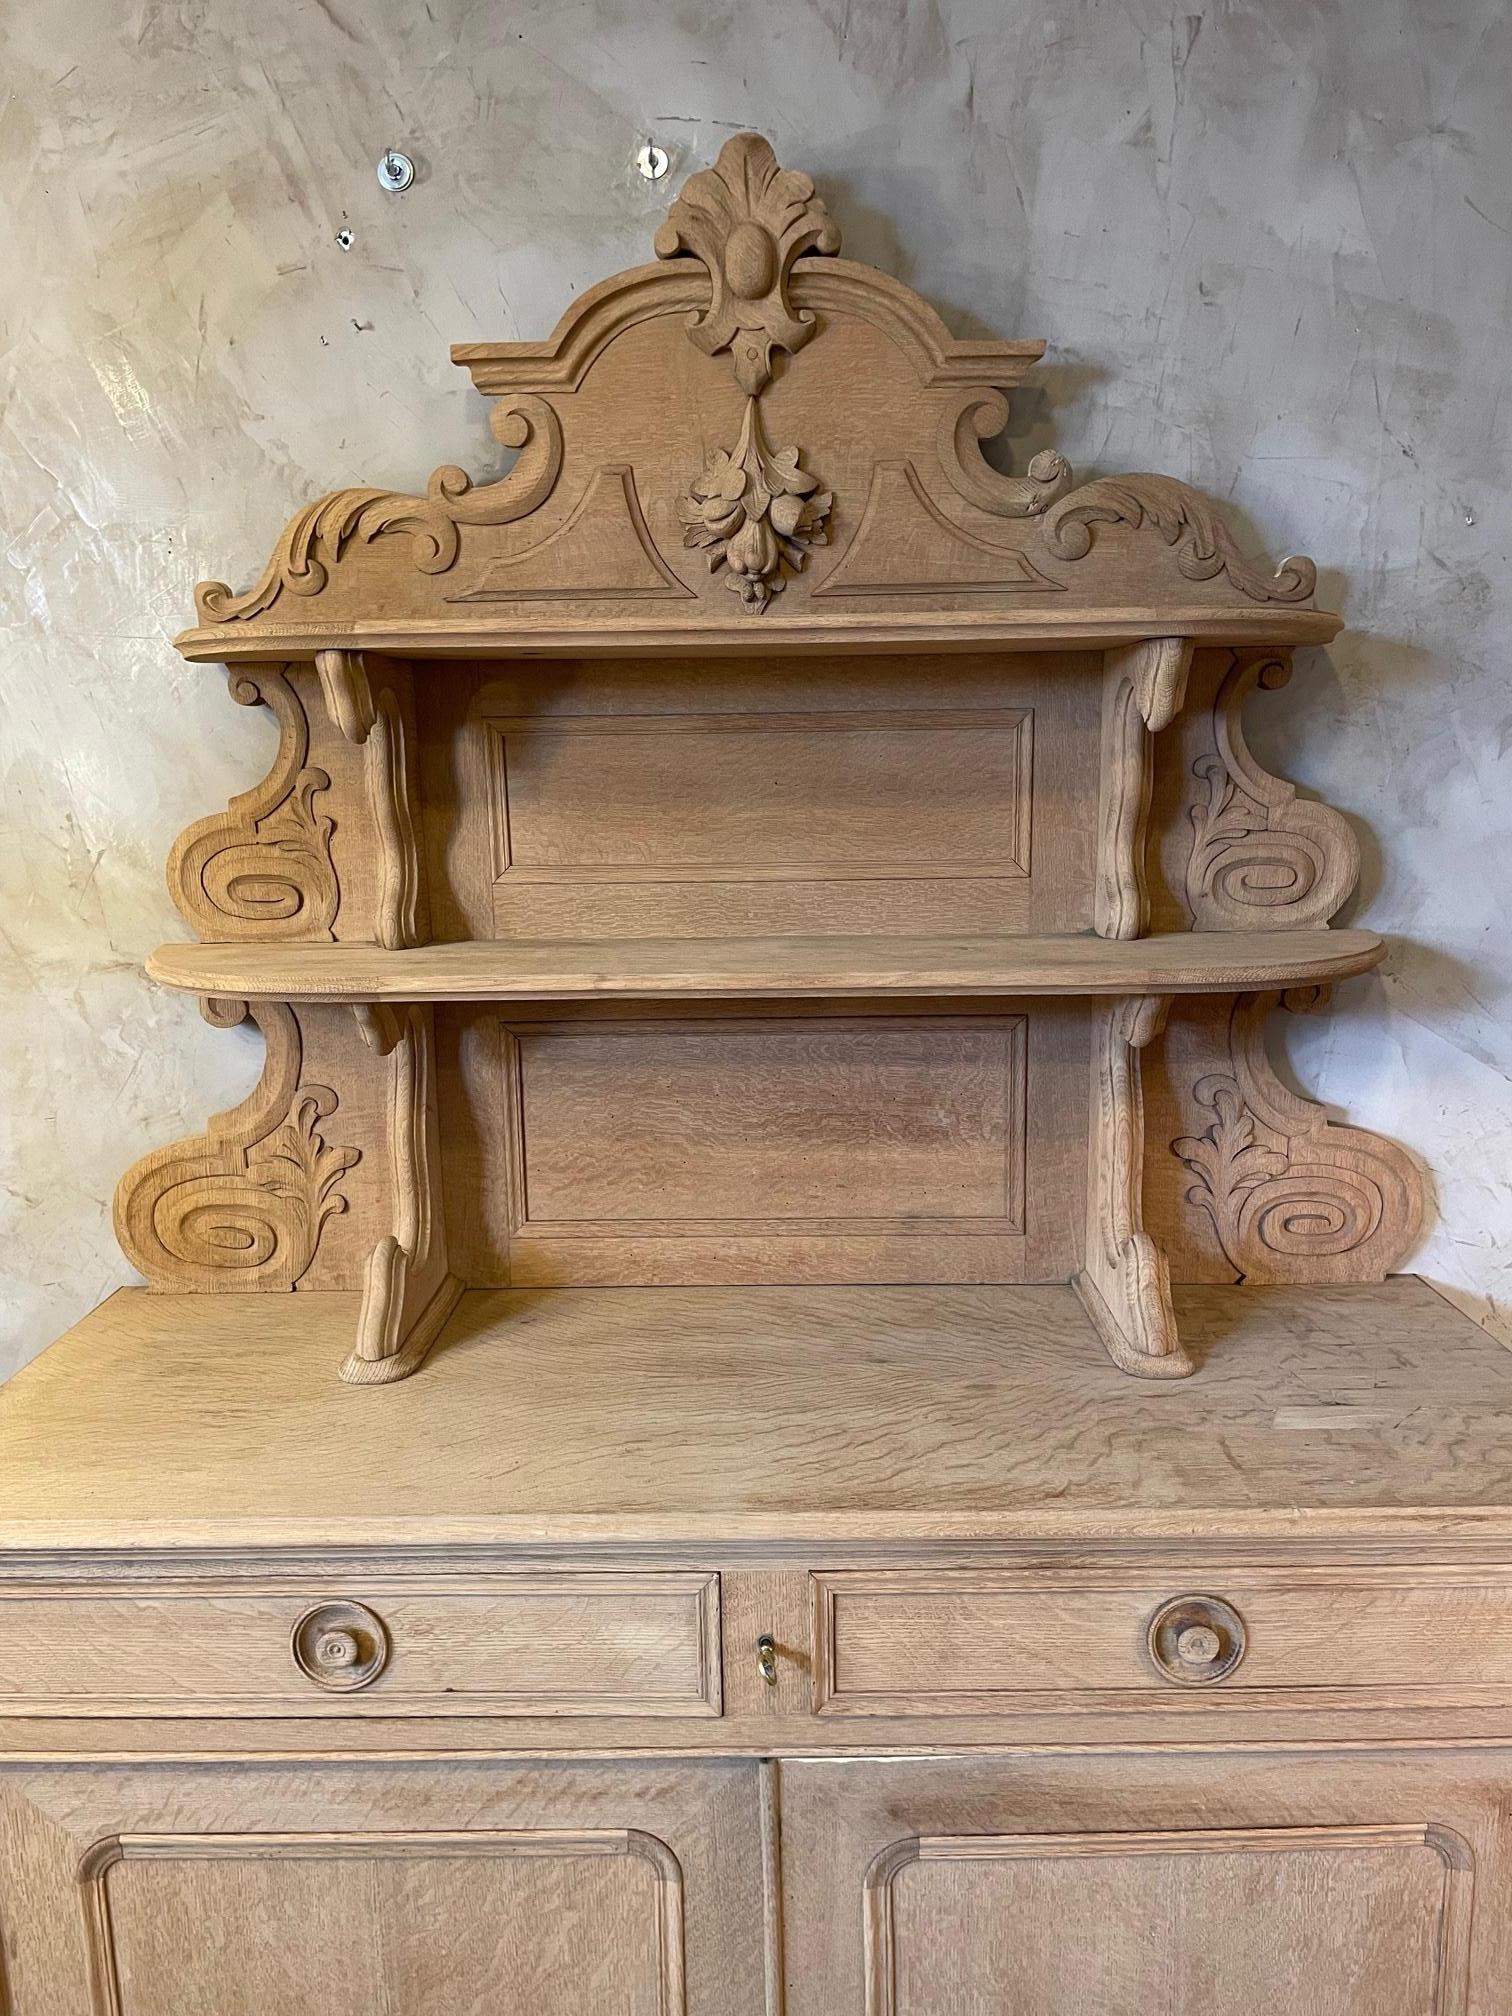 Very nice late 19th century French pickled Oak Saint Hubert buffet from the 1890s. 
Two drawers closed by a key. Two large doors with a long shelf. 
Nice carved wood details. This buffet has been pickled thanks to a sand process that makes the